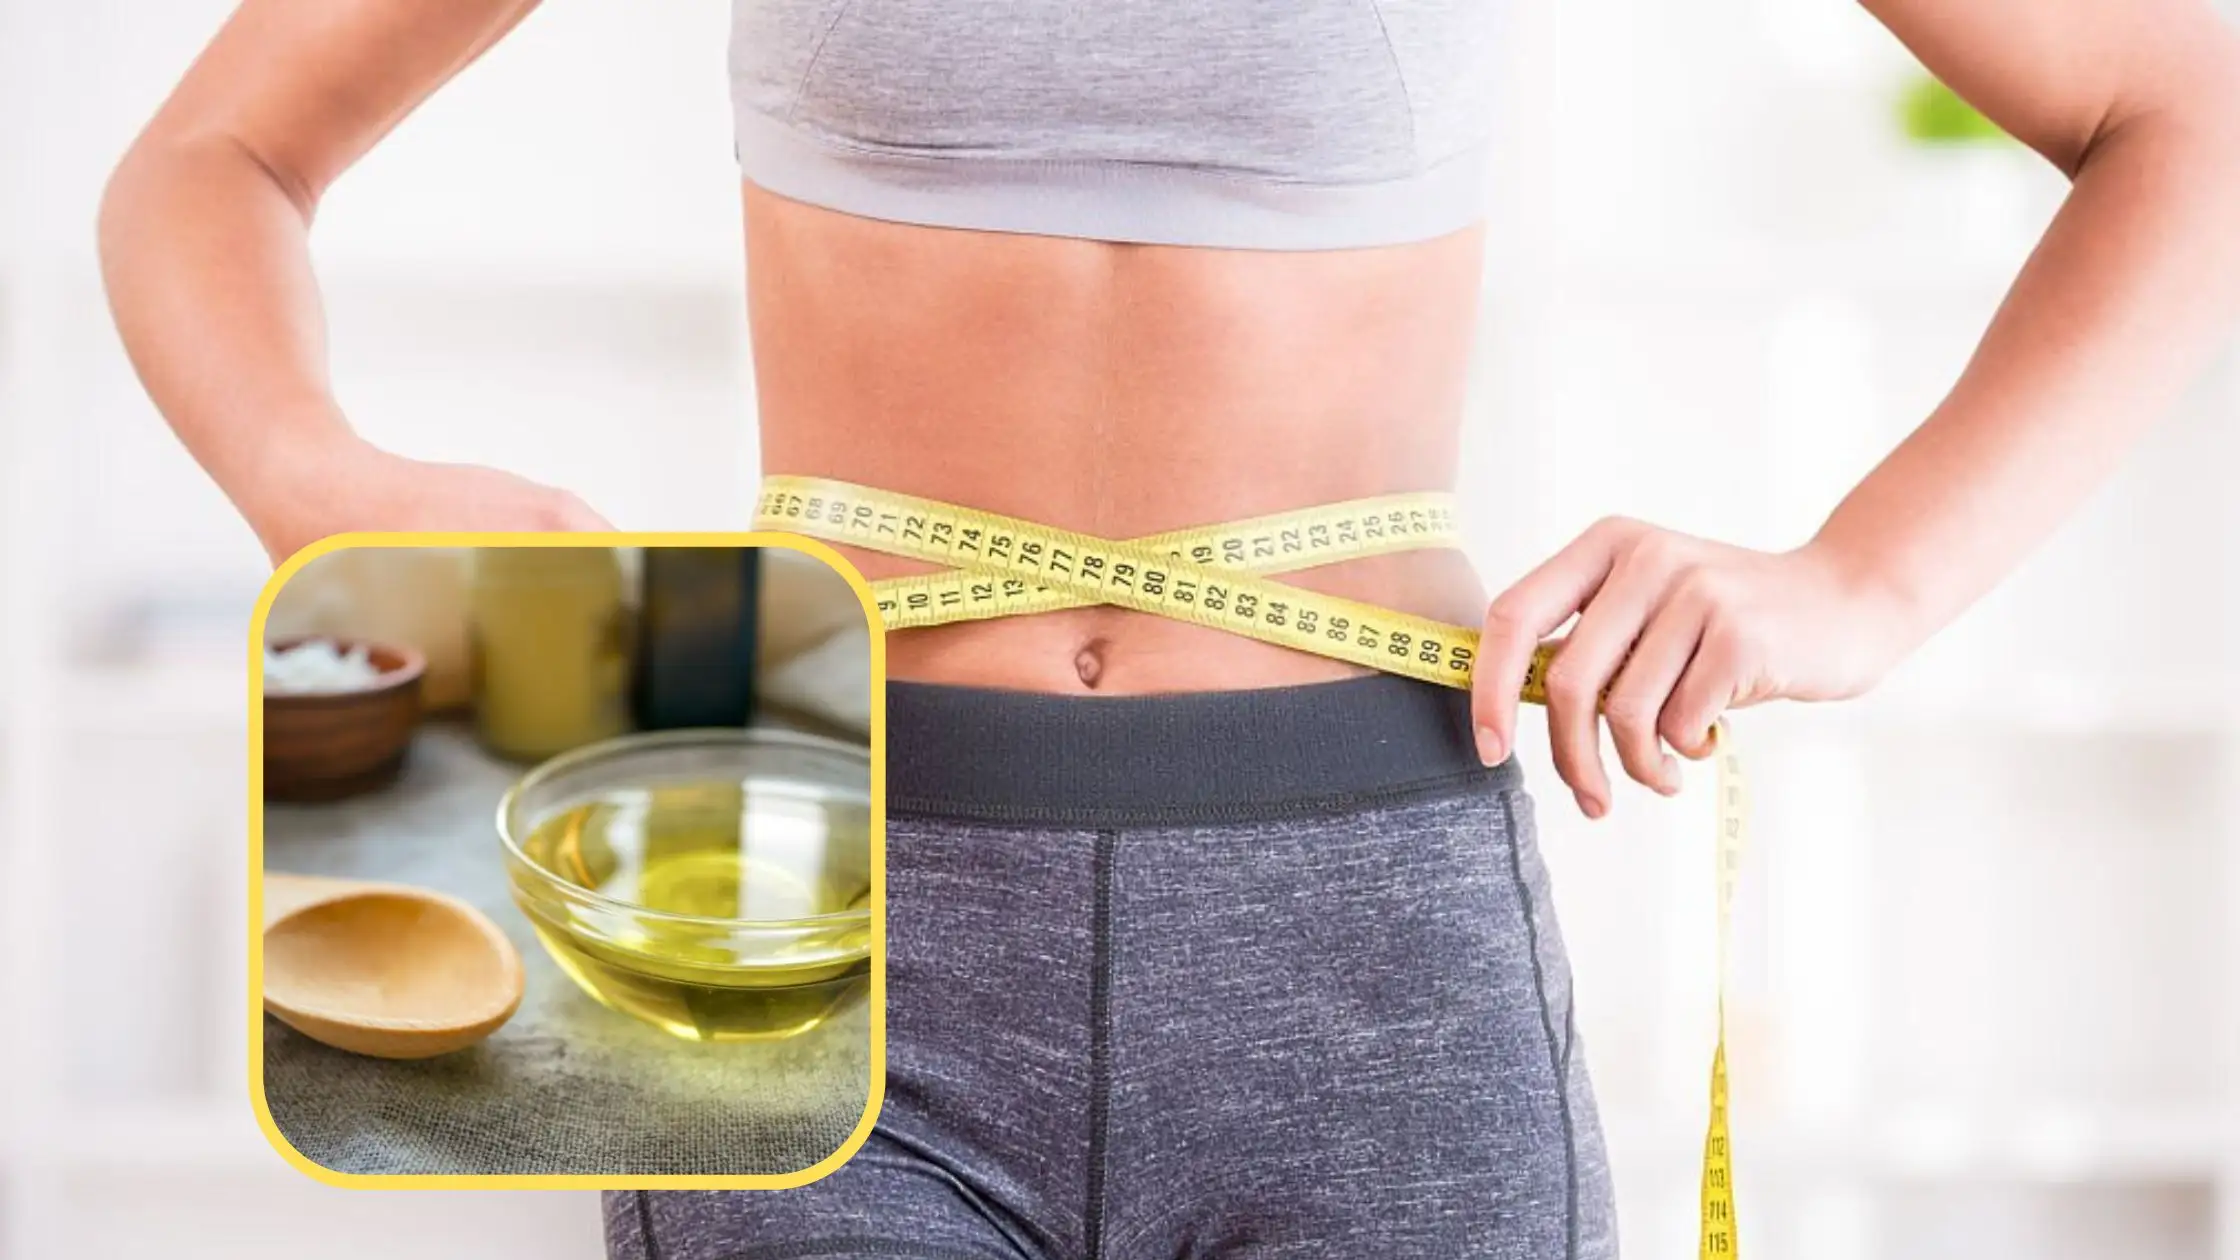  MCT Oil For Weight Loss